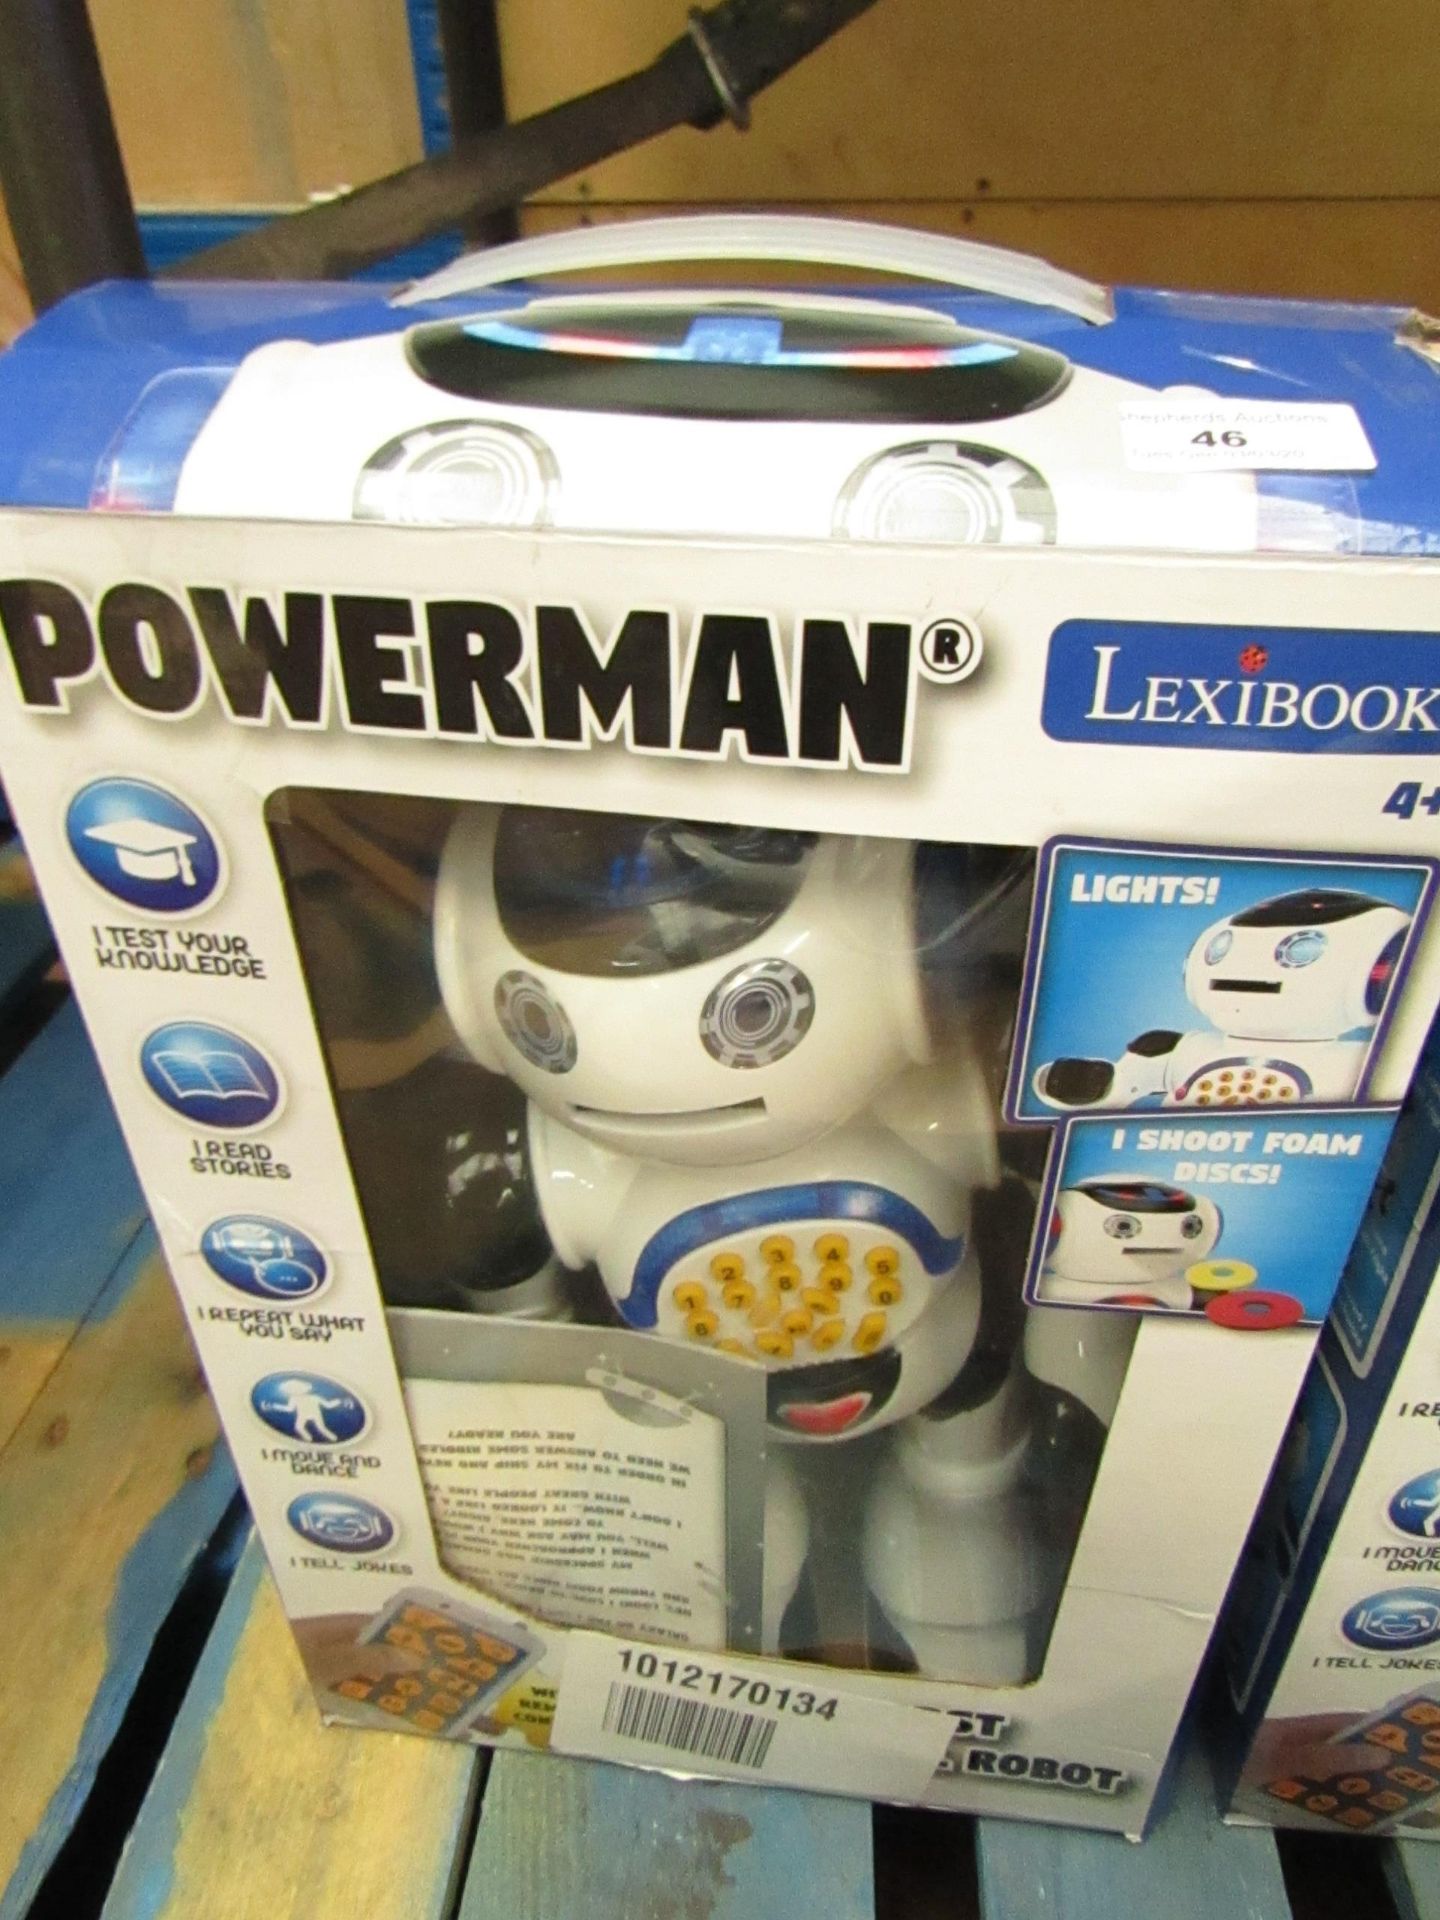 LexiBook - PowerMan Educational Robot - Untested and Boxed.